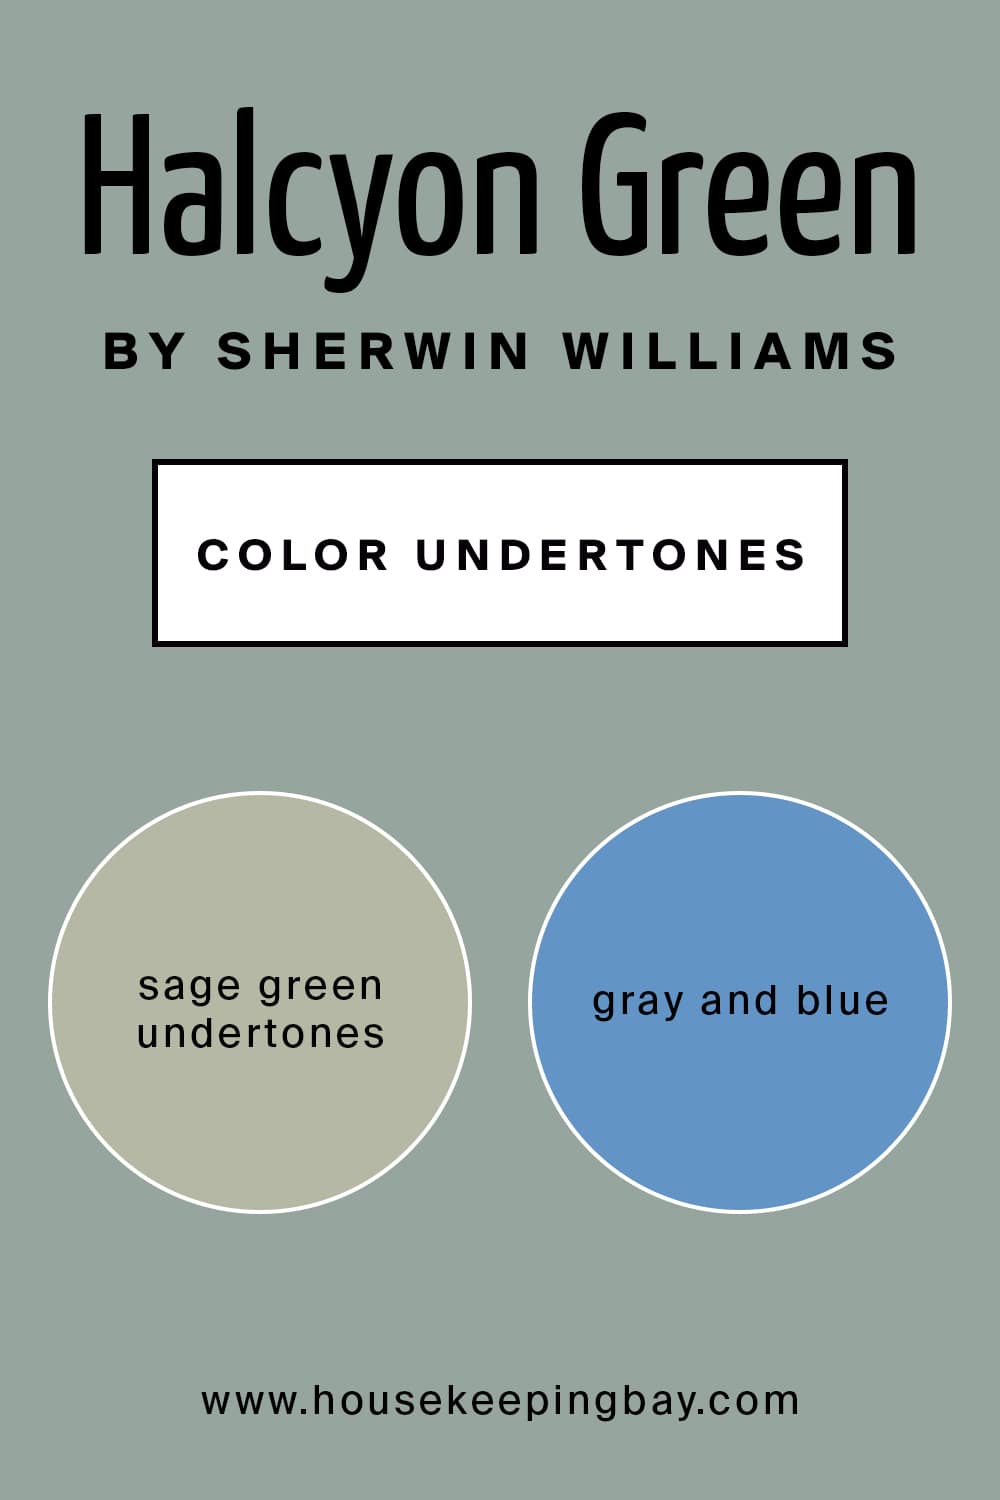 Halcyon Green by Sherwin Williams Color Undertones